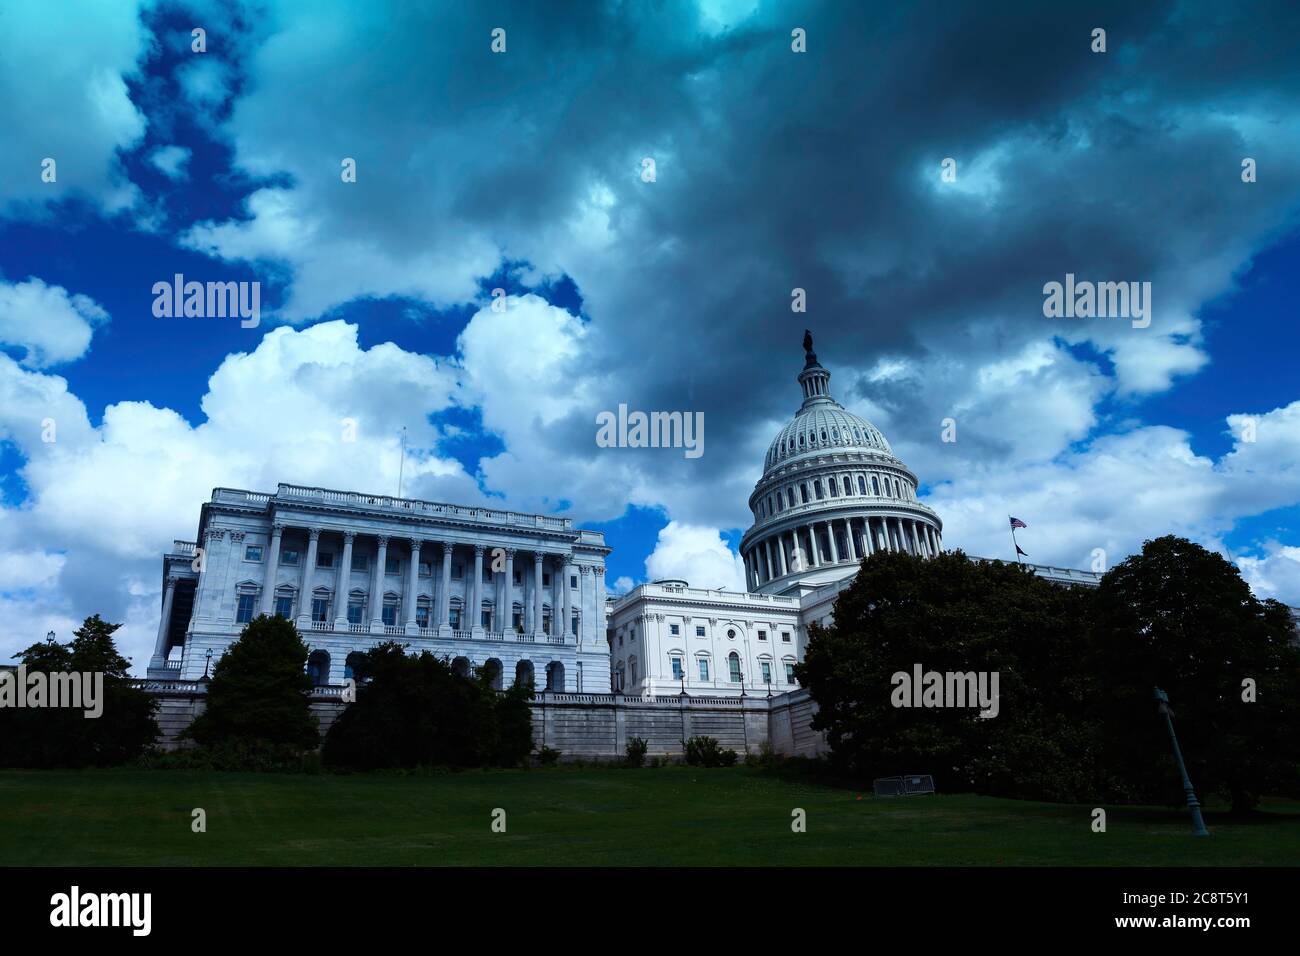 View of west side of the U.S. Capitol building with an ominous appearance, Washington, DC, United States, color Stock Photo